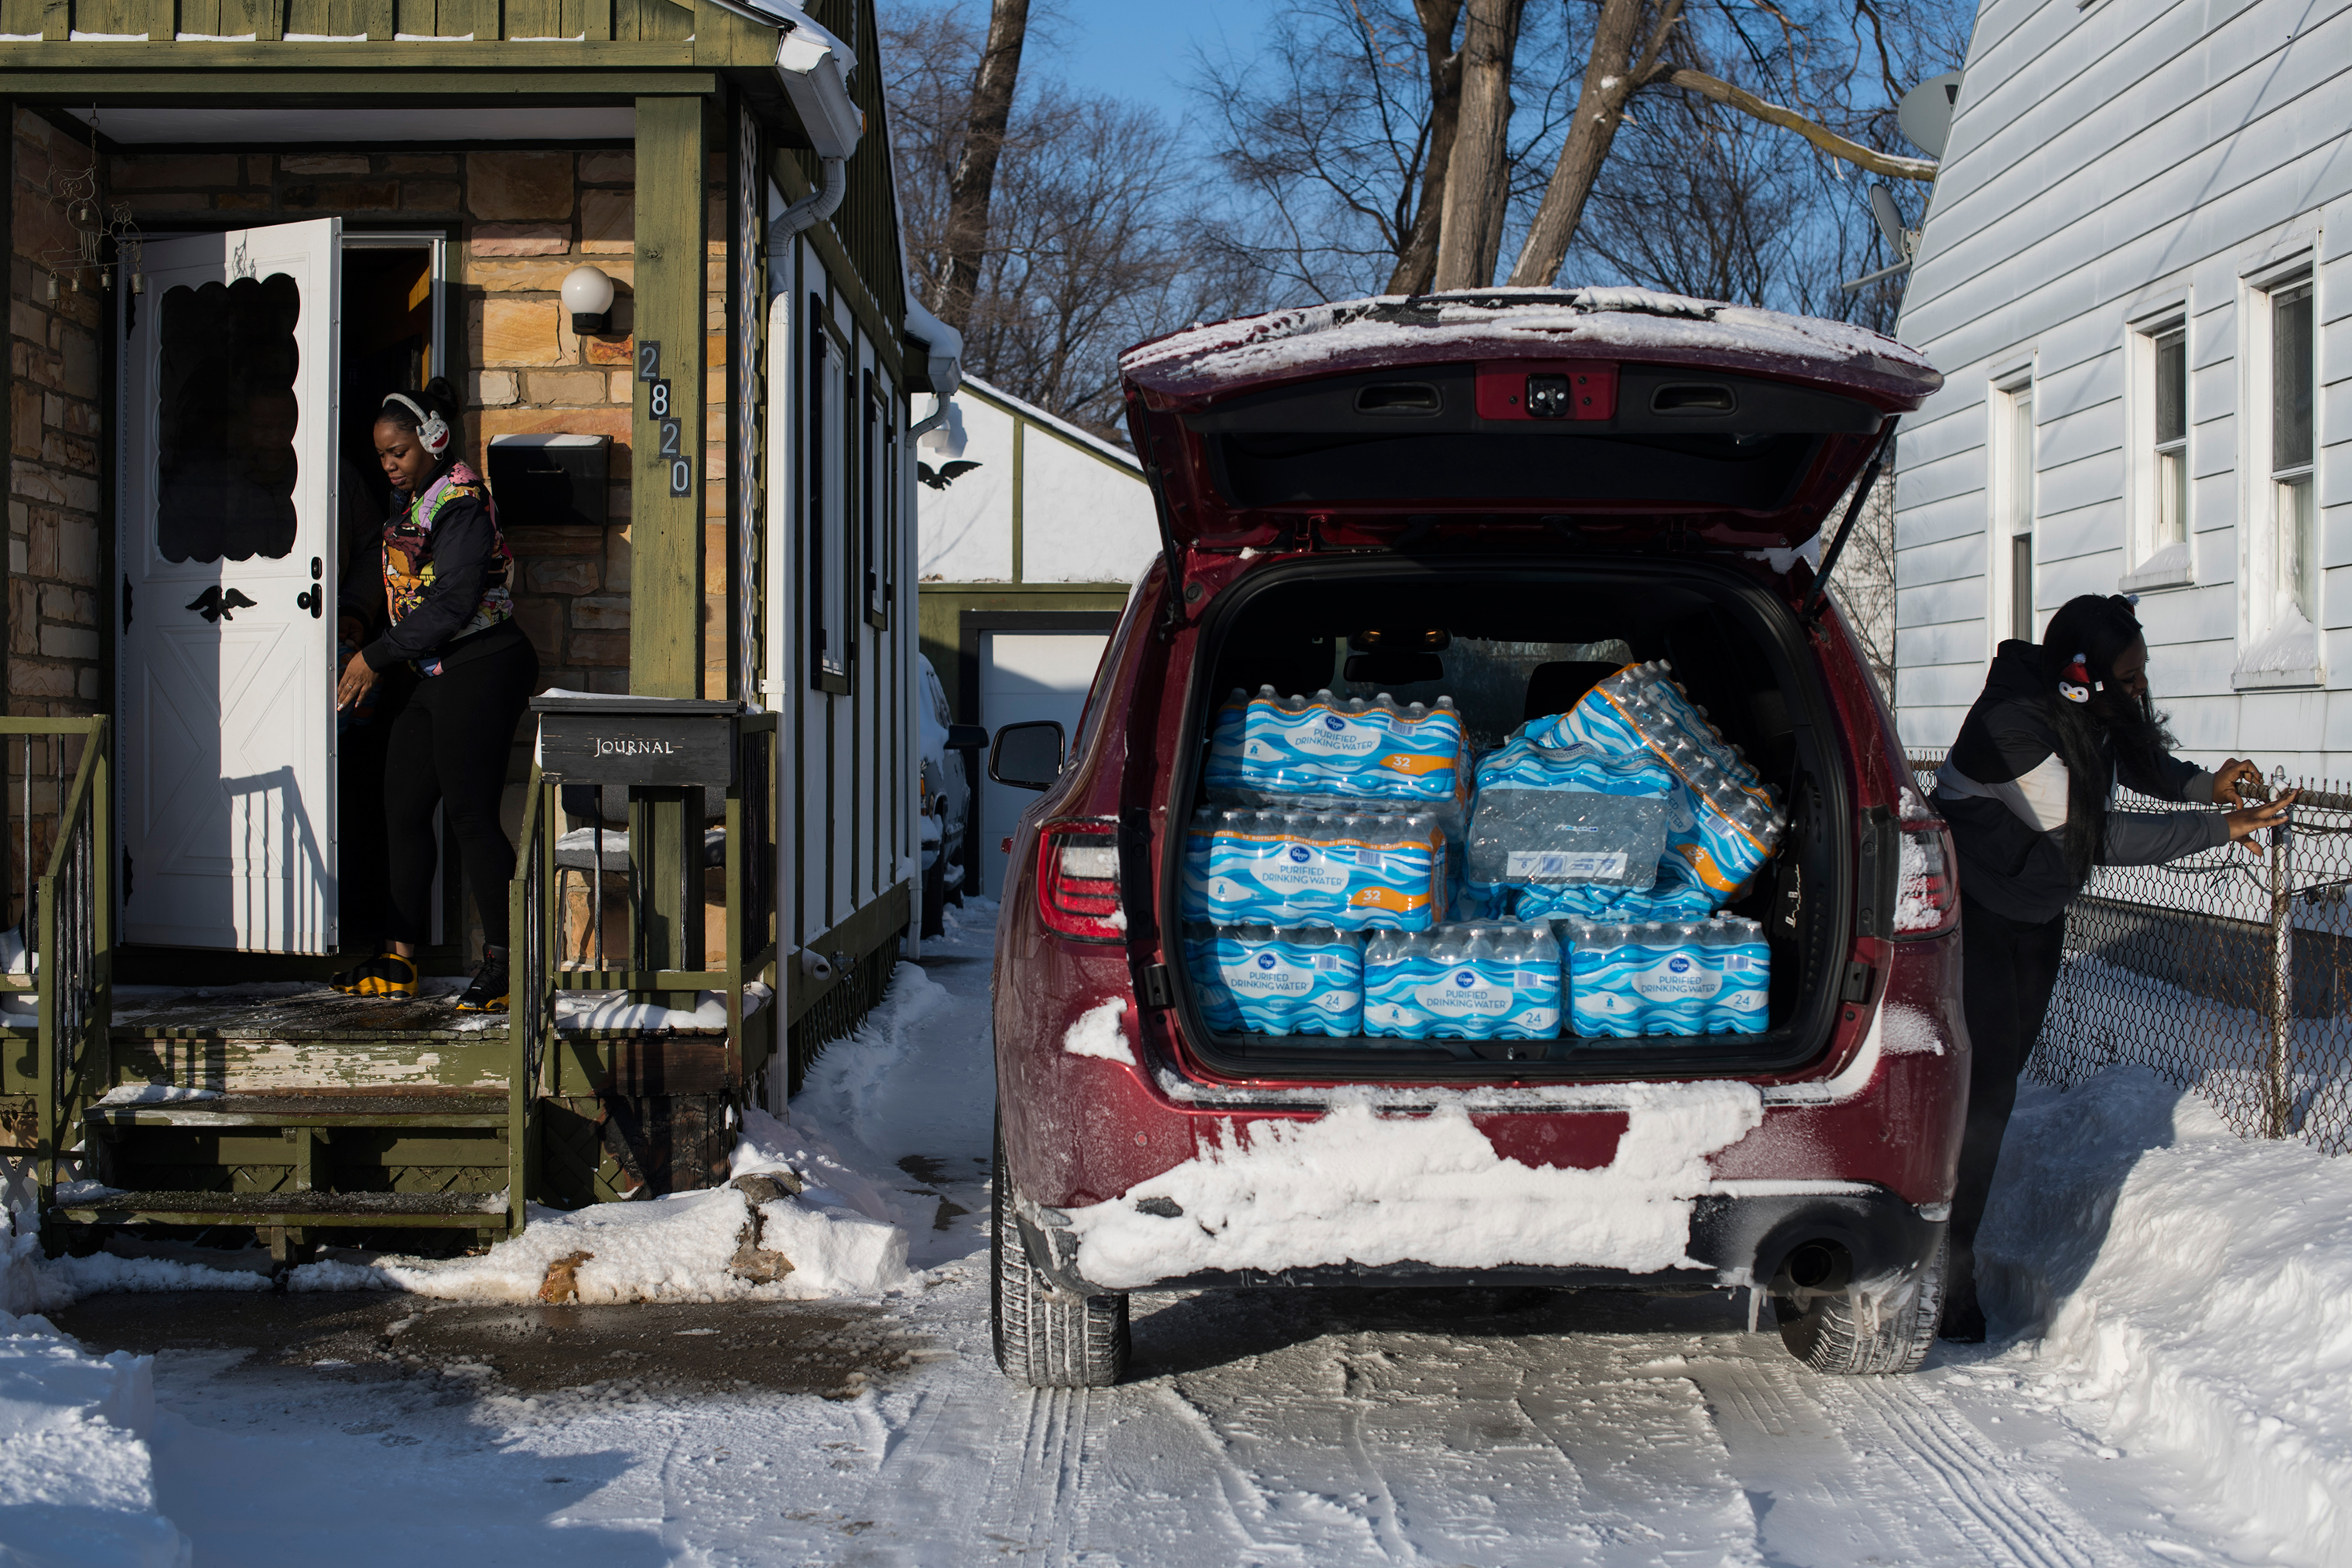 Hawk and a friend deliver cases of water, which she bought, to Flint residents in January. (Brittany Greeson for TIME)